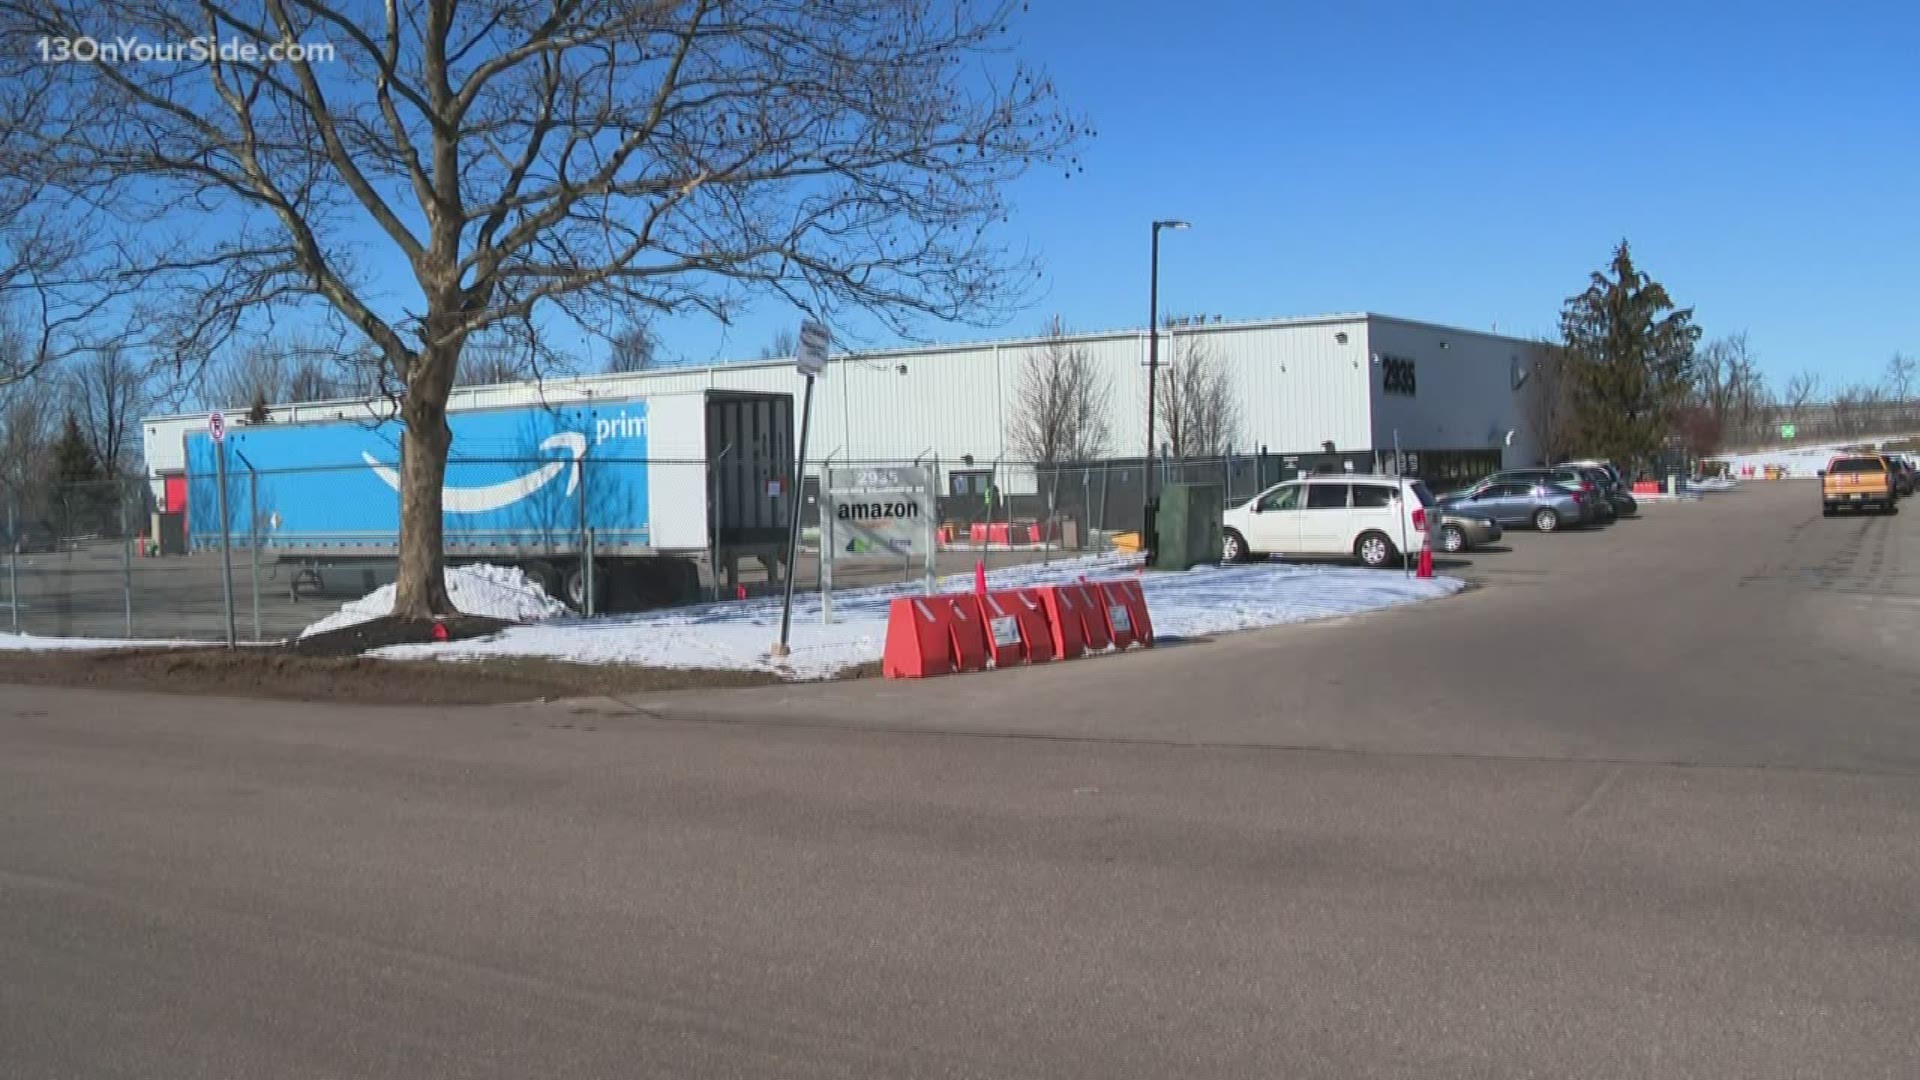 A logistic company that lost a contract to deliver packages for Amazon is closings a West Michigan facility, leaving more than 110 people without jobs.